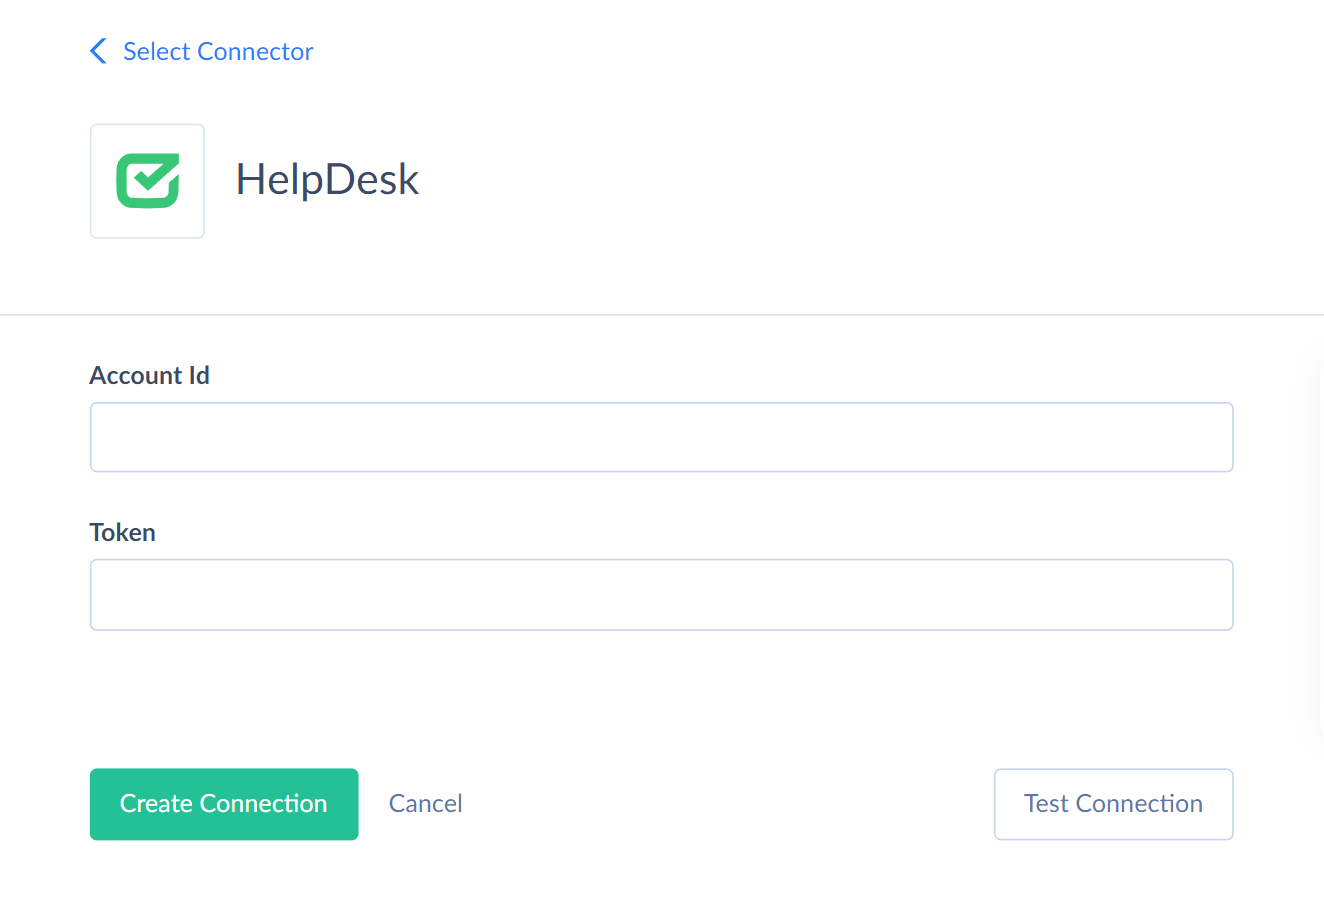 Signing in to HelpDesk